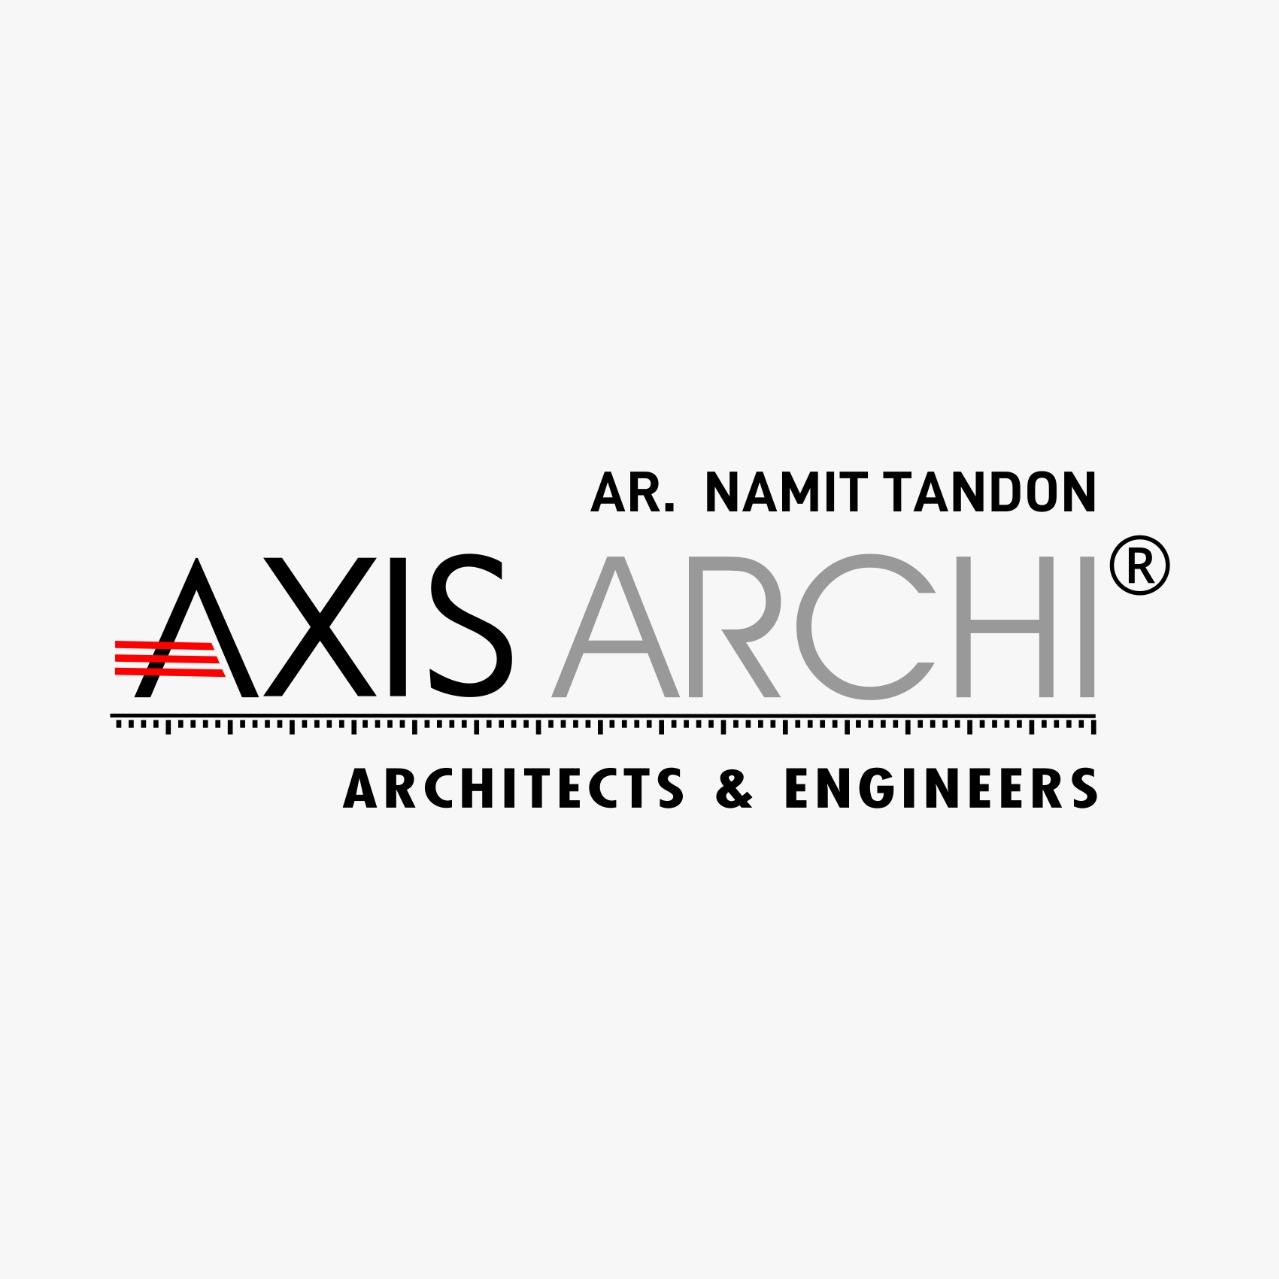 Axis Archi | Architect Namit Tandon|Accounting Services|Professional Services